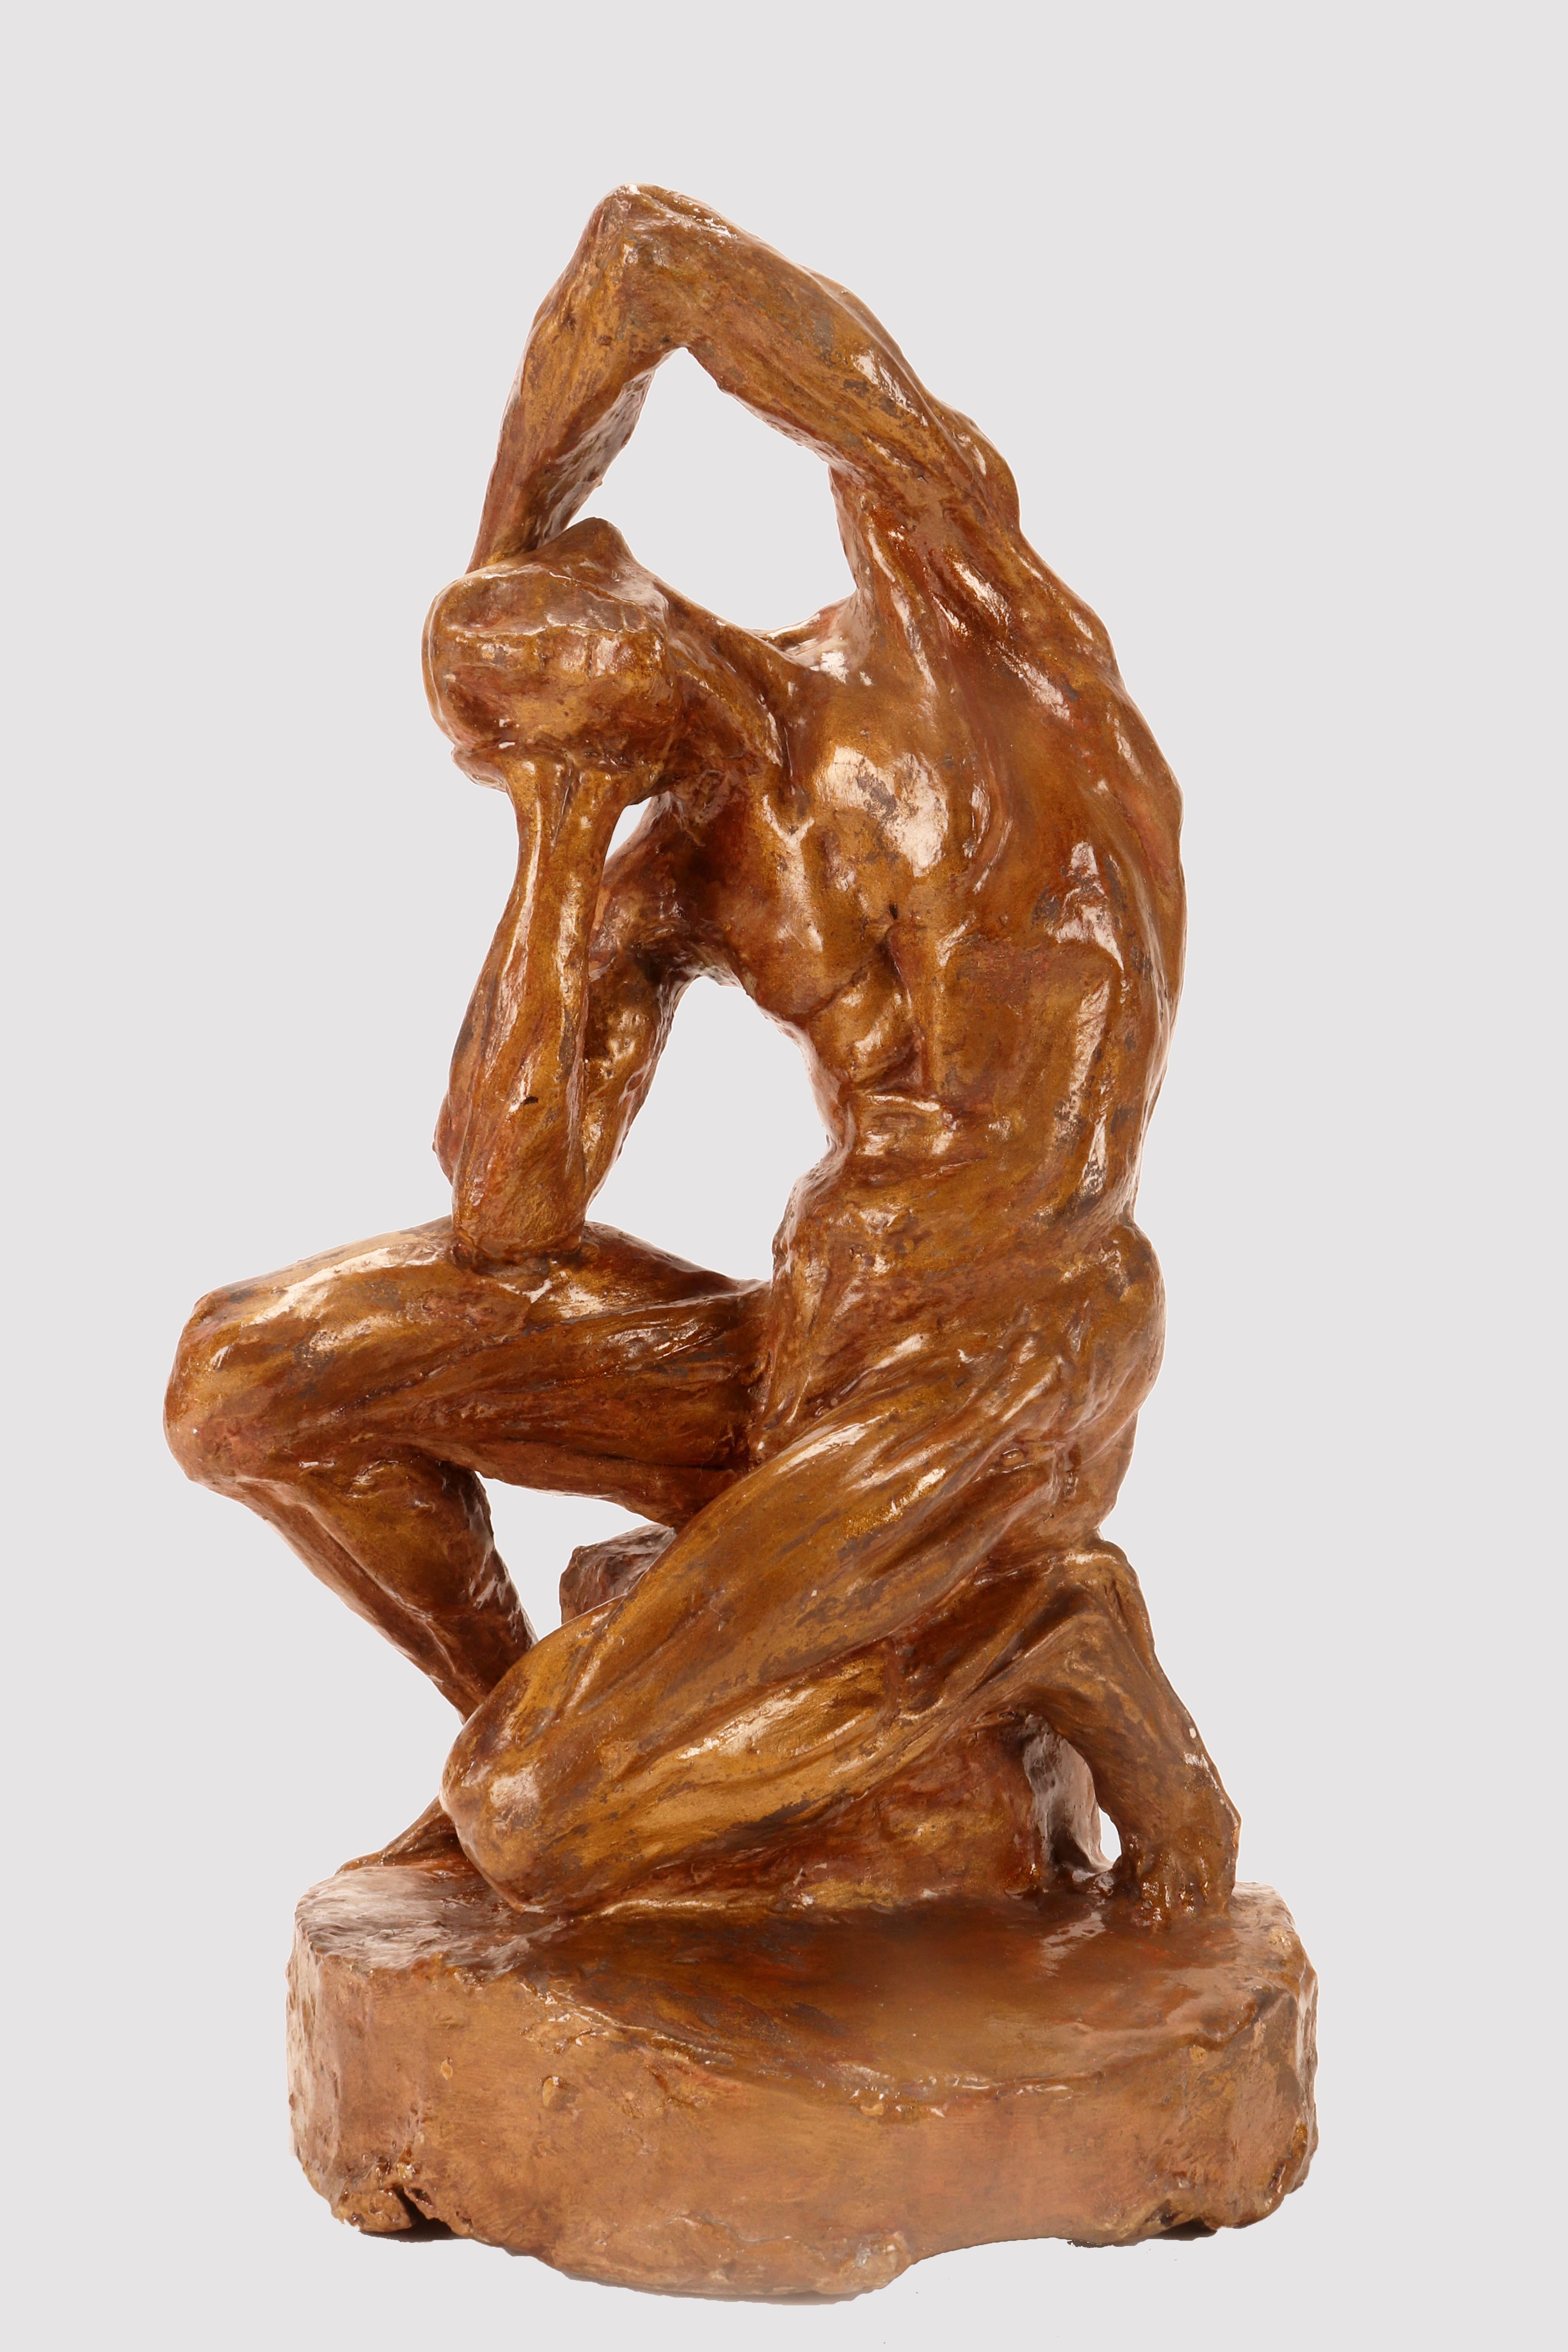 An anatomical plaster sculpture with traces of gilding, depicting a flayed man sitting on a cubic base, in a position with the torso inclined and the arms supporting the head. Reference to a work by the French sculptor Pierre Puget (1620-1694).